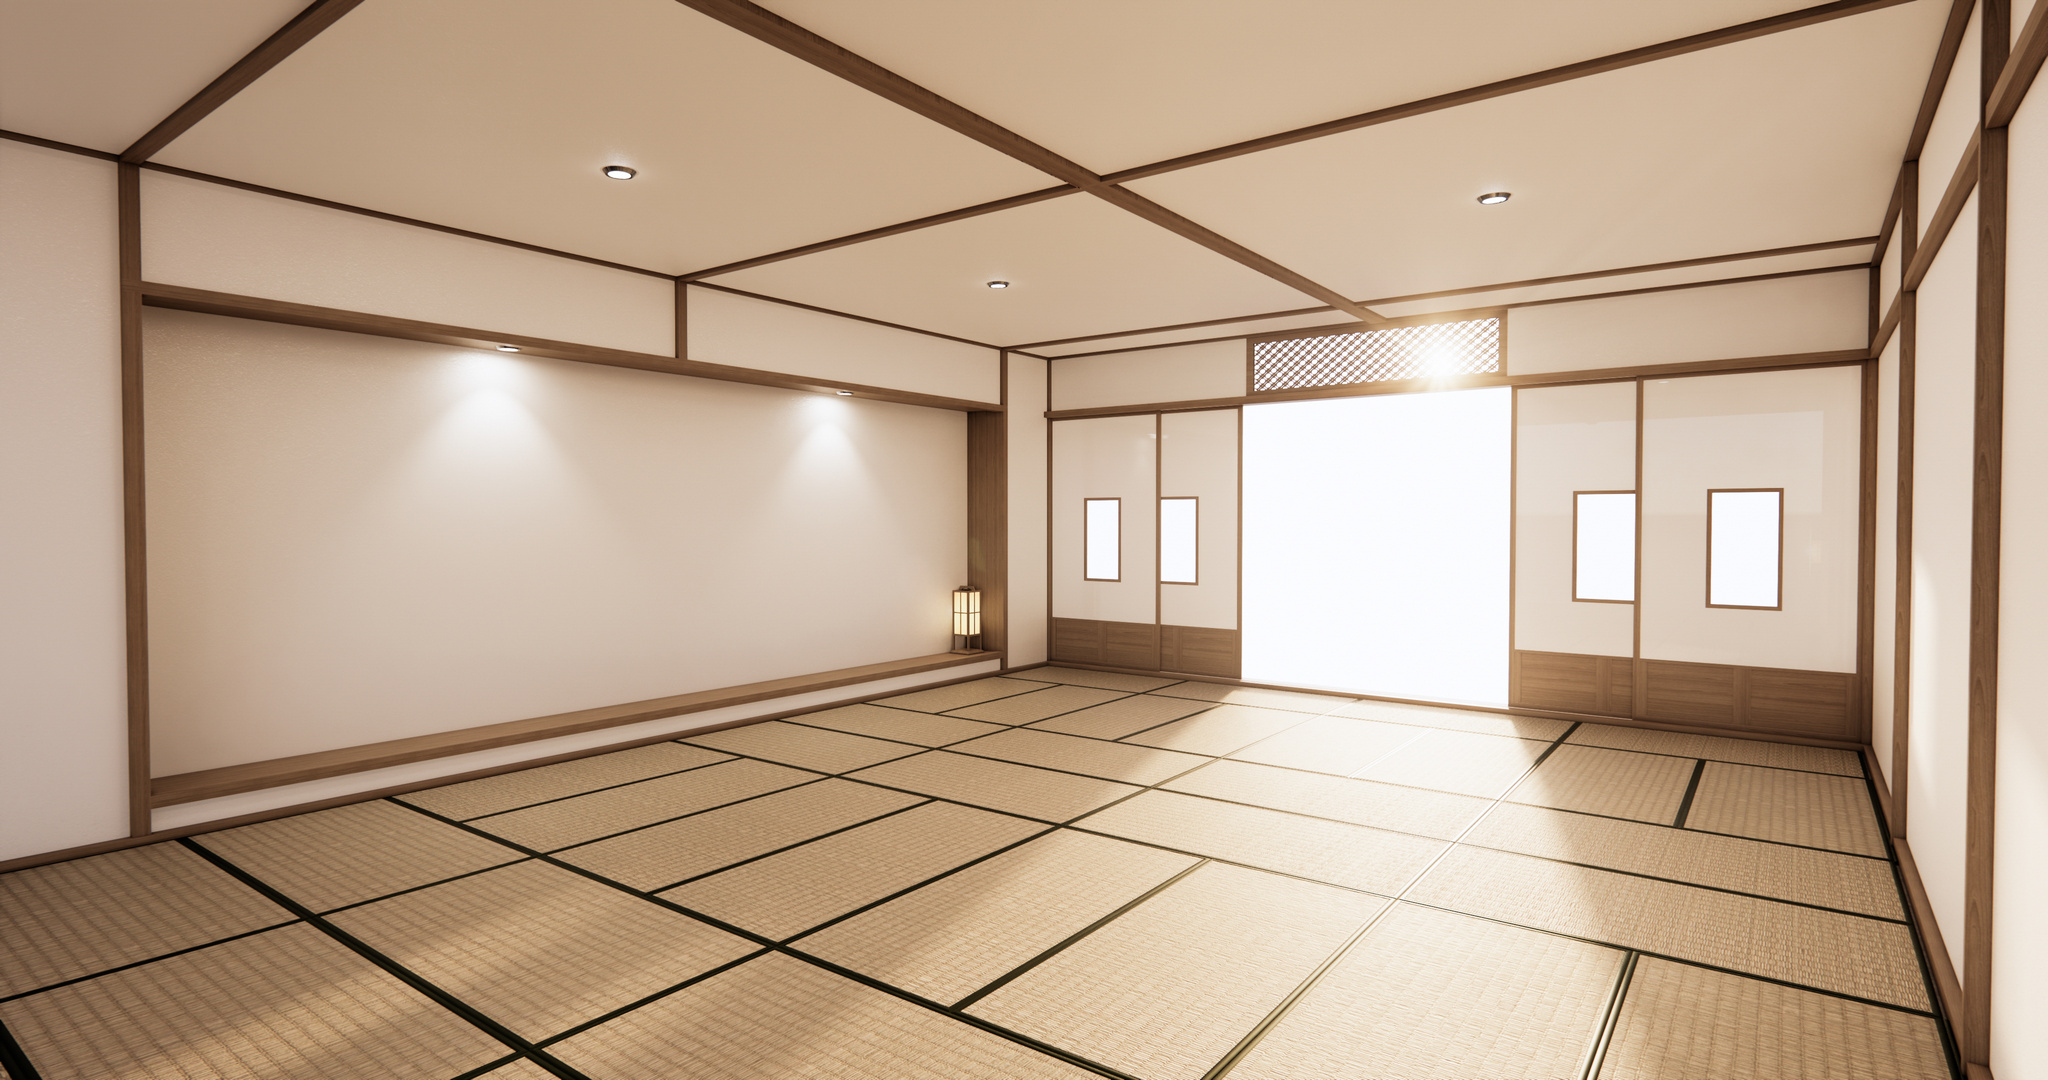 Traditional Design of a Room in Japan